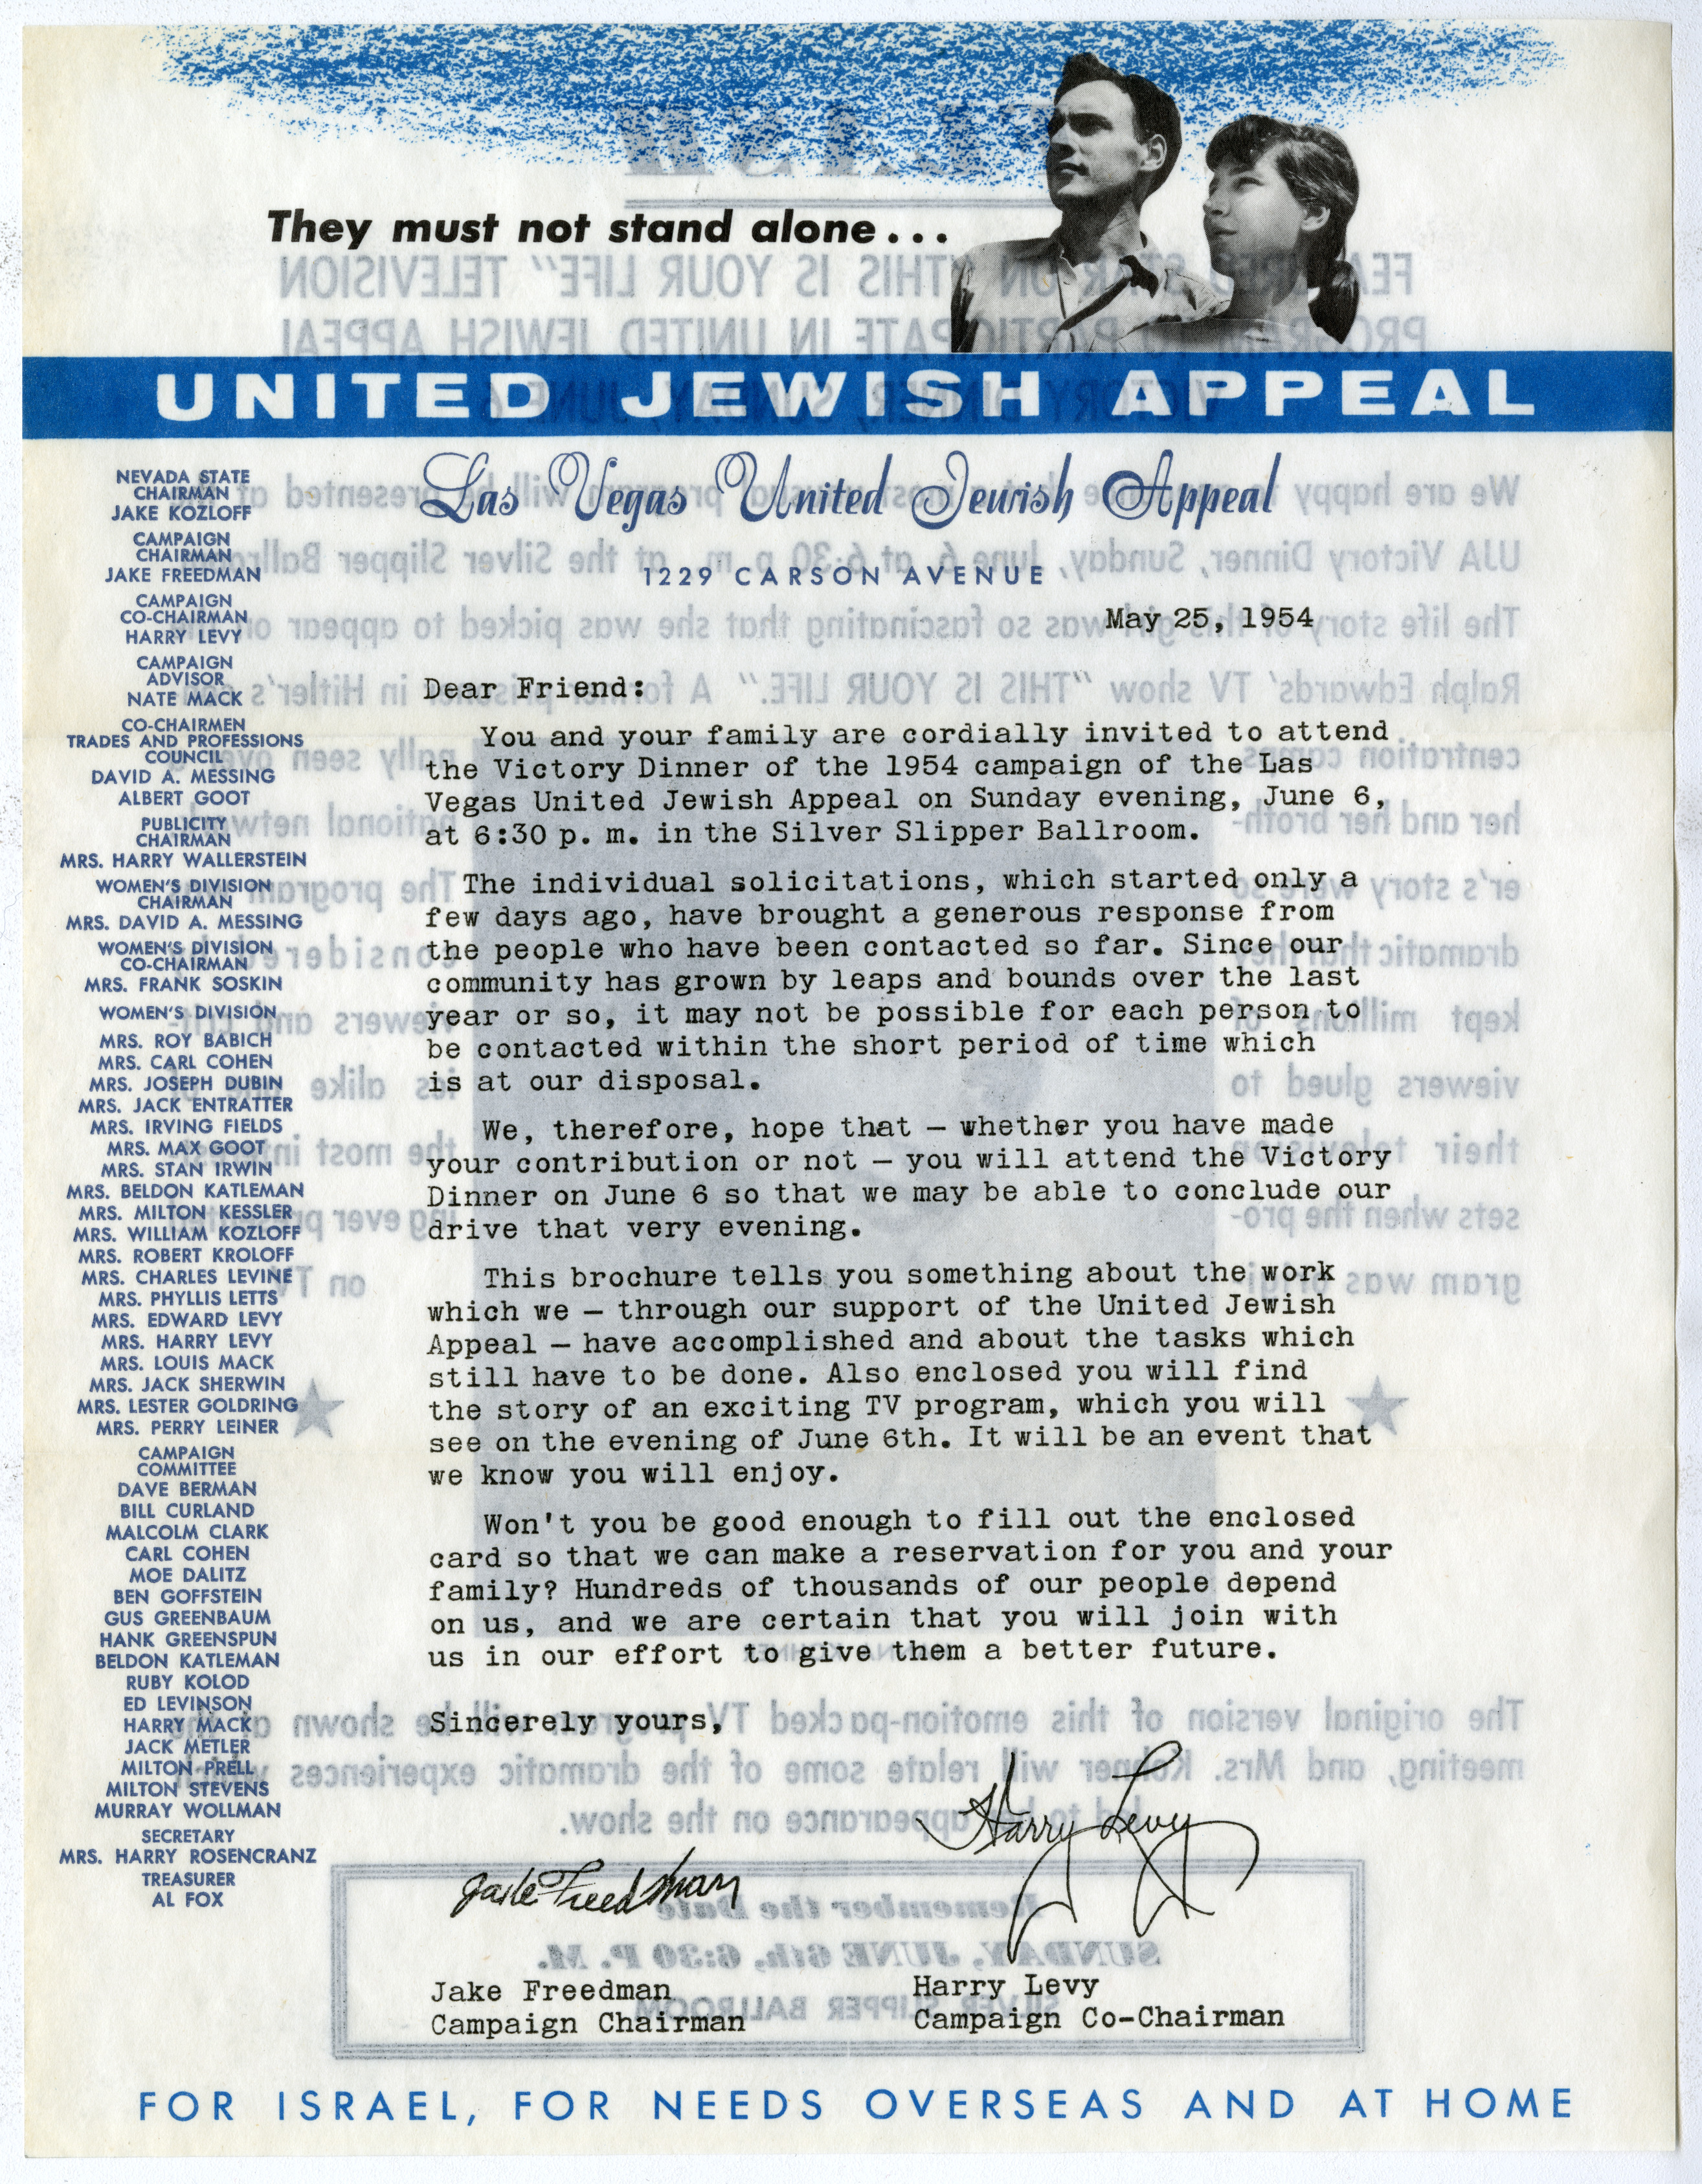 United Jewish Appeal Victory Dinner Invitation, May 25, 1954 (front)